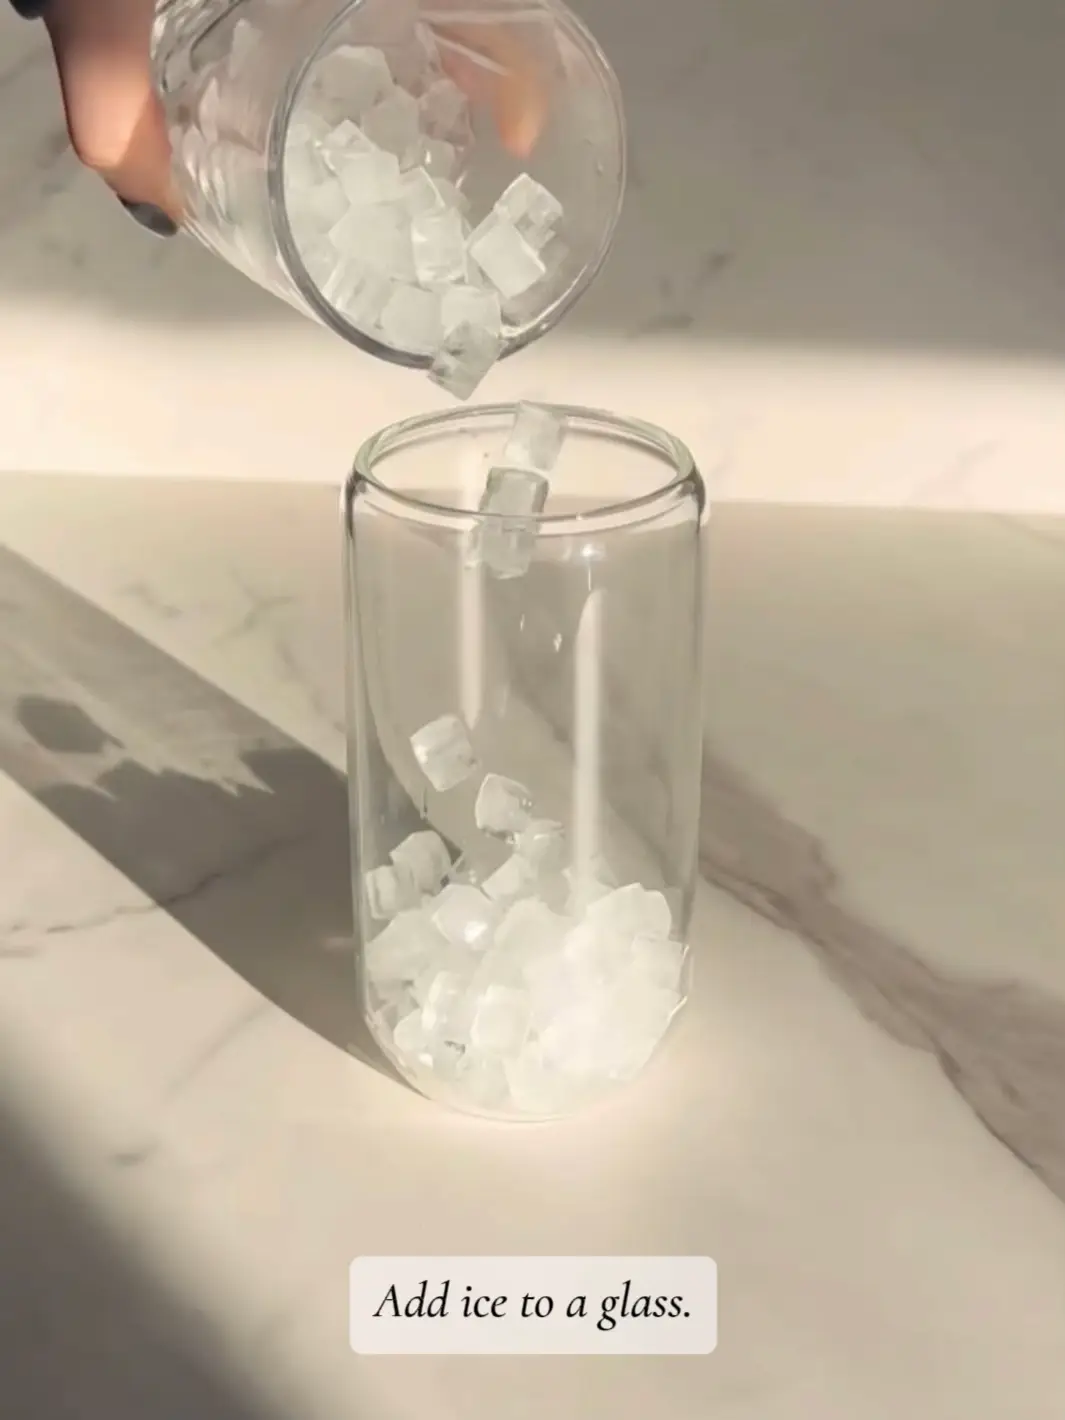  A hand holding a glass with ice and a lemon wedge.